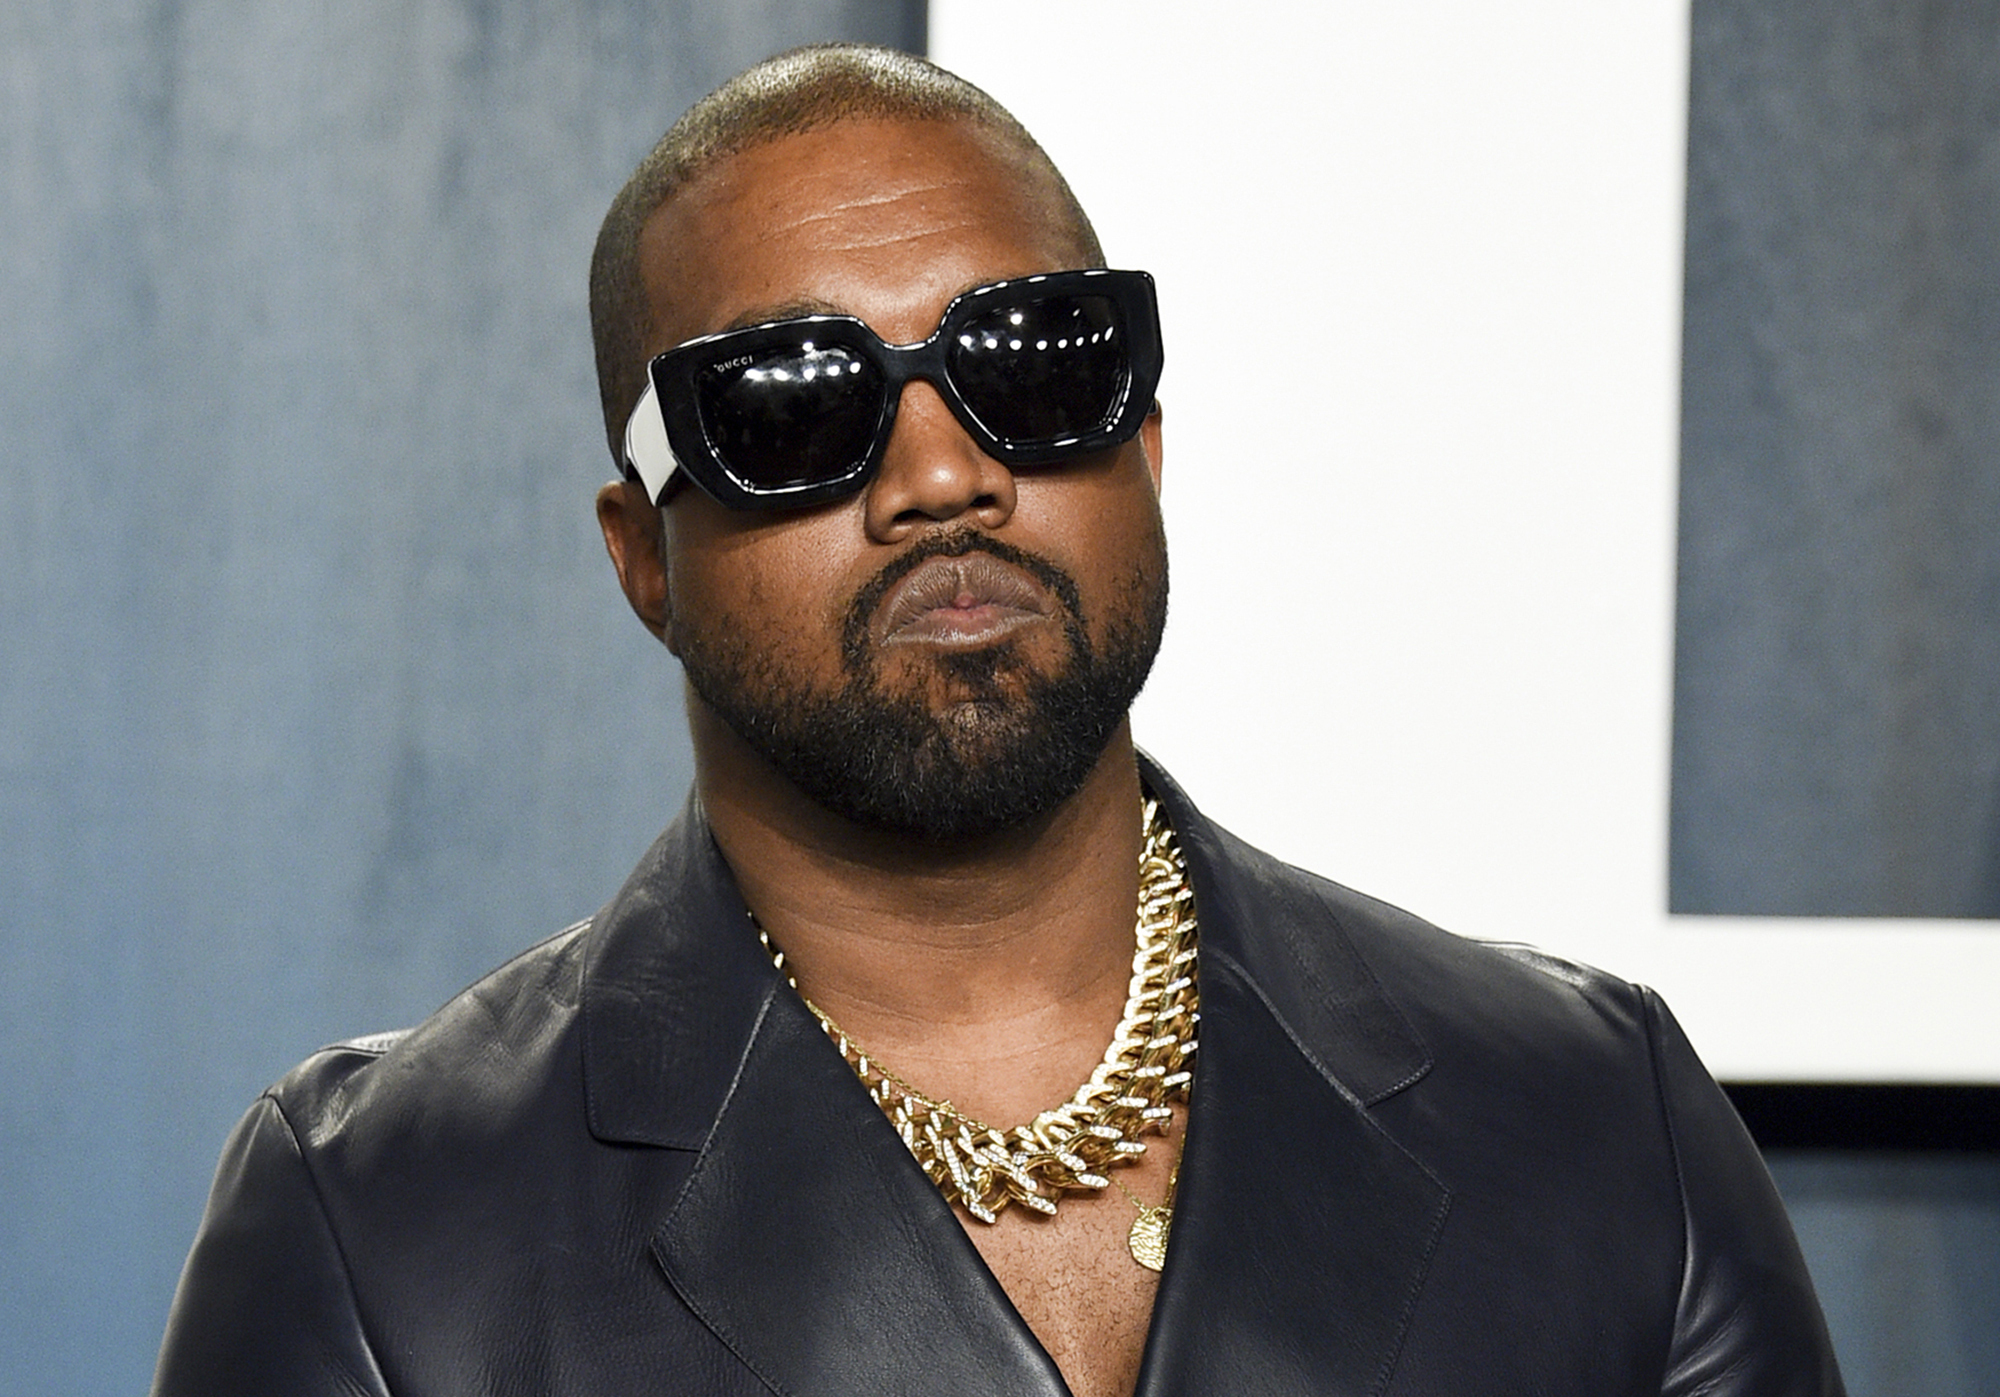 Kanye West appears at the Vanity Fair Oscar Party in Beverly Hills on Feb. 9, 2020.